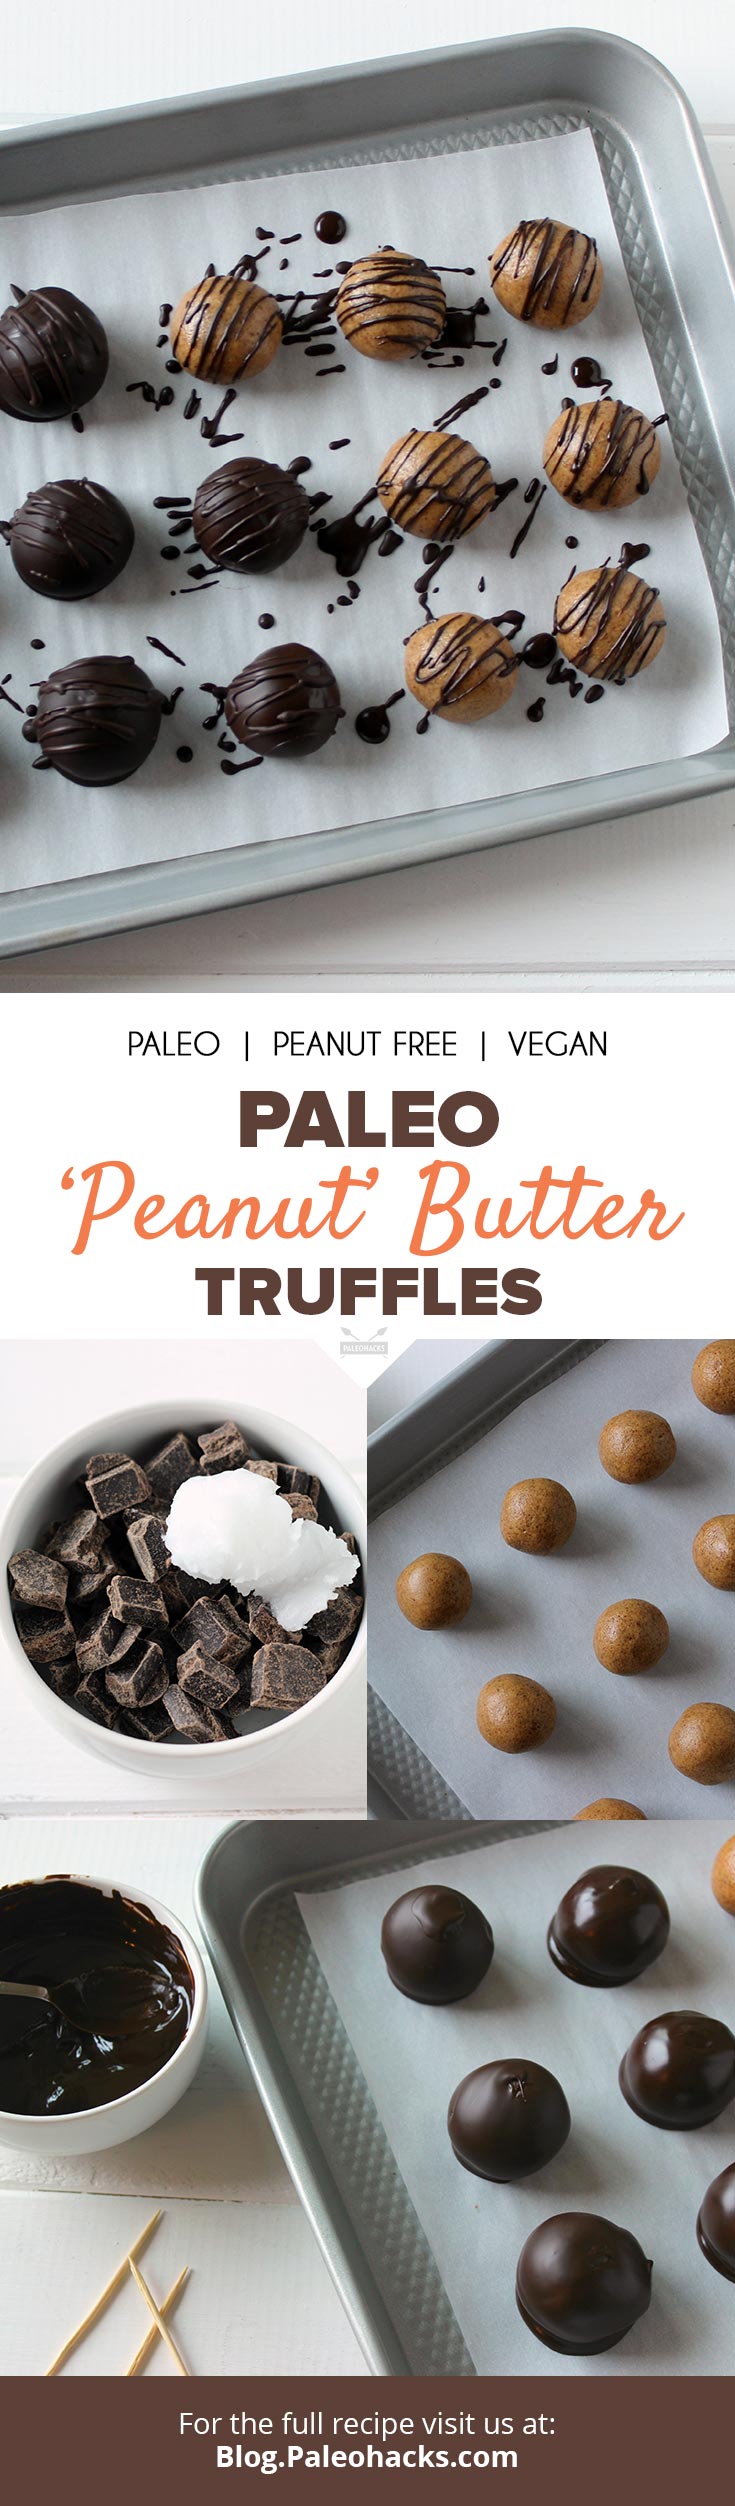 If you don't have a lot of time or you're looking for an easy-to-make treat that can impress, these Paleo "Peanut" Butter Truffles are the perfect dessert.